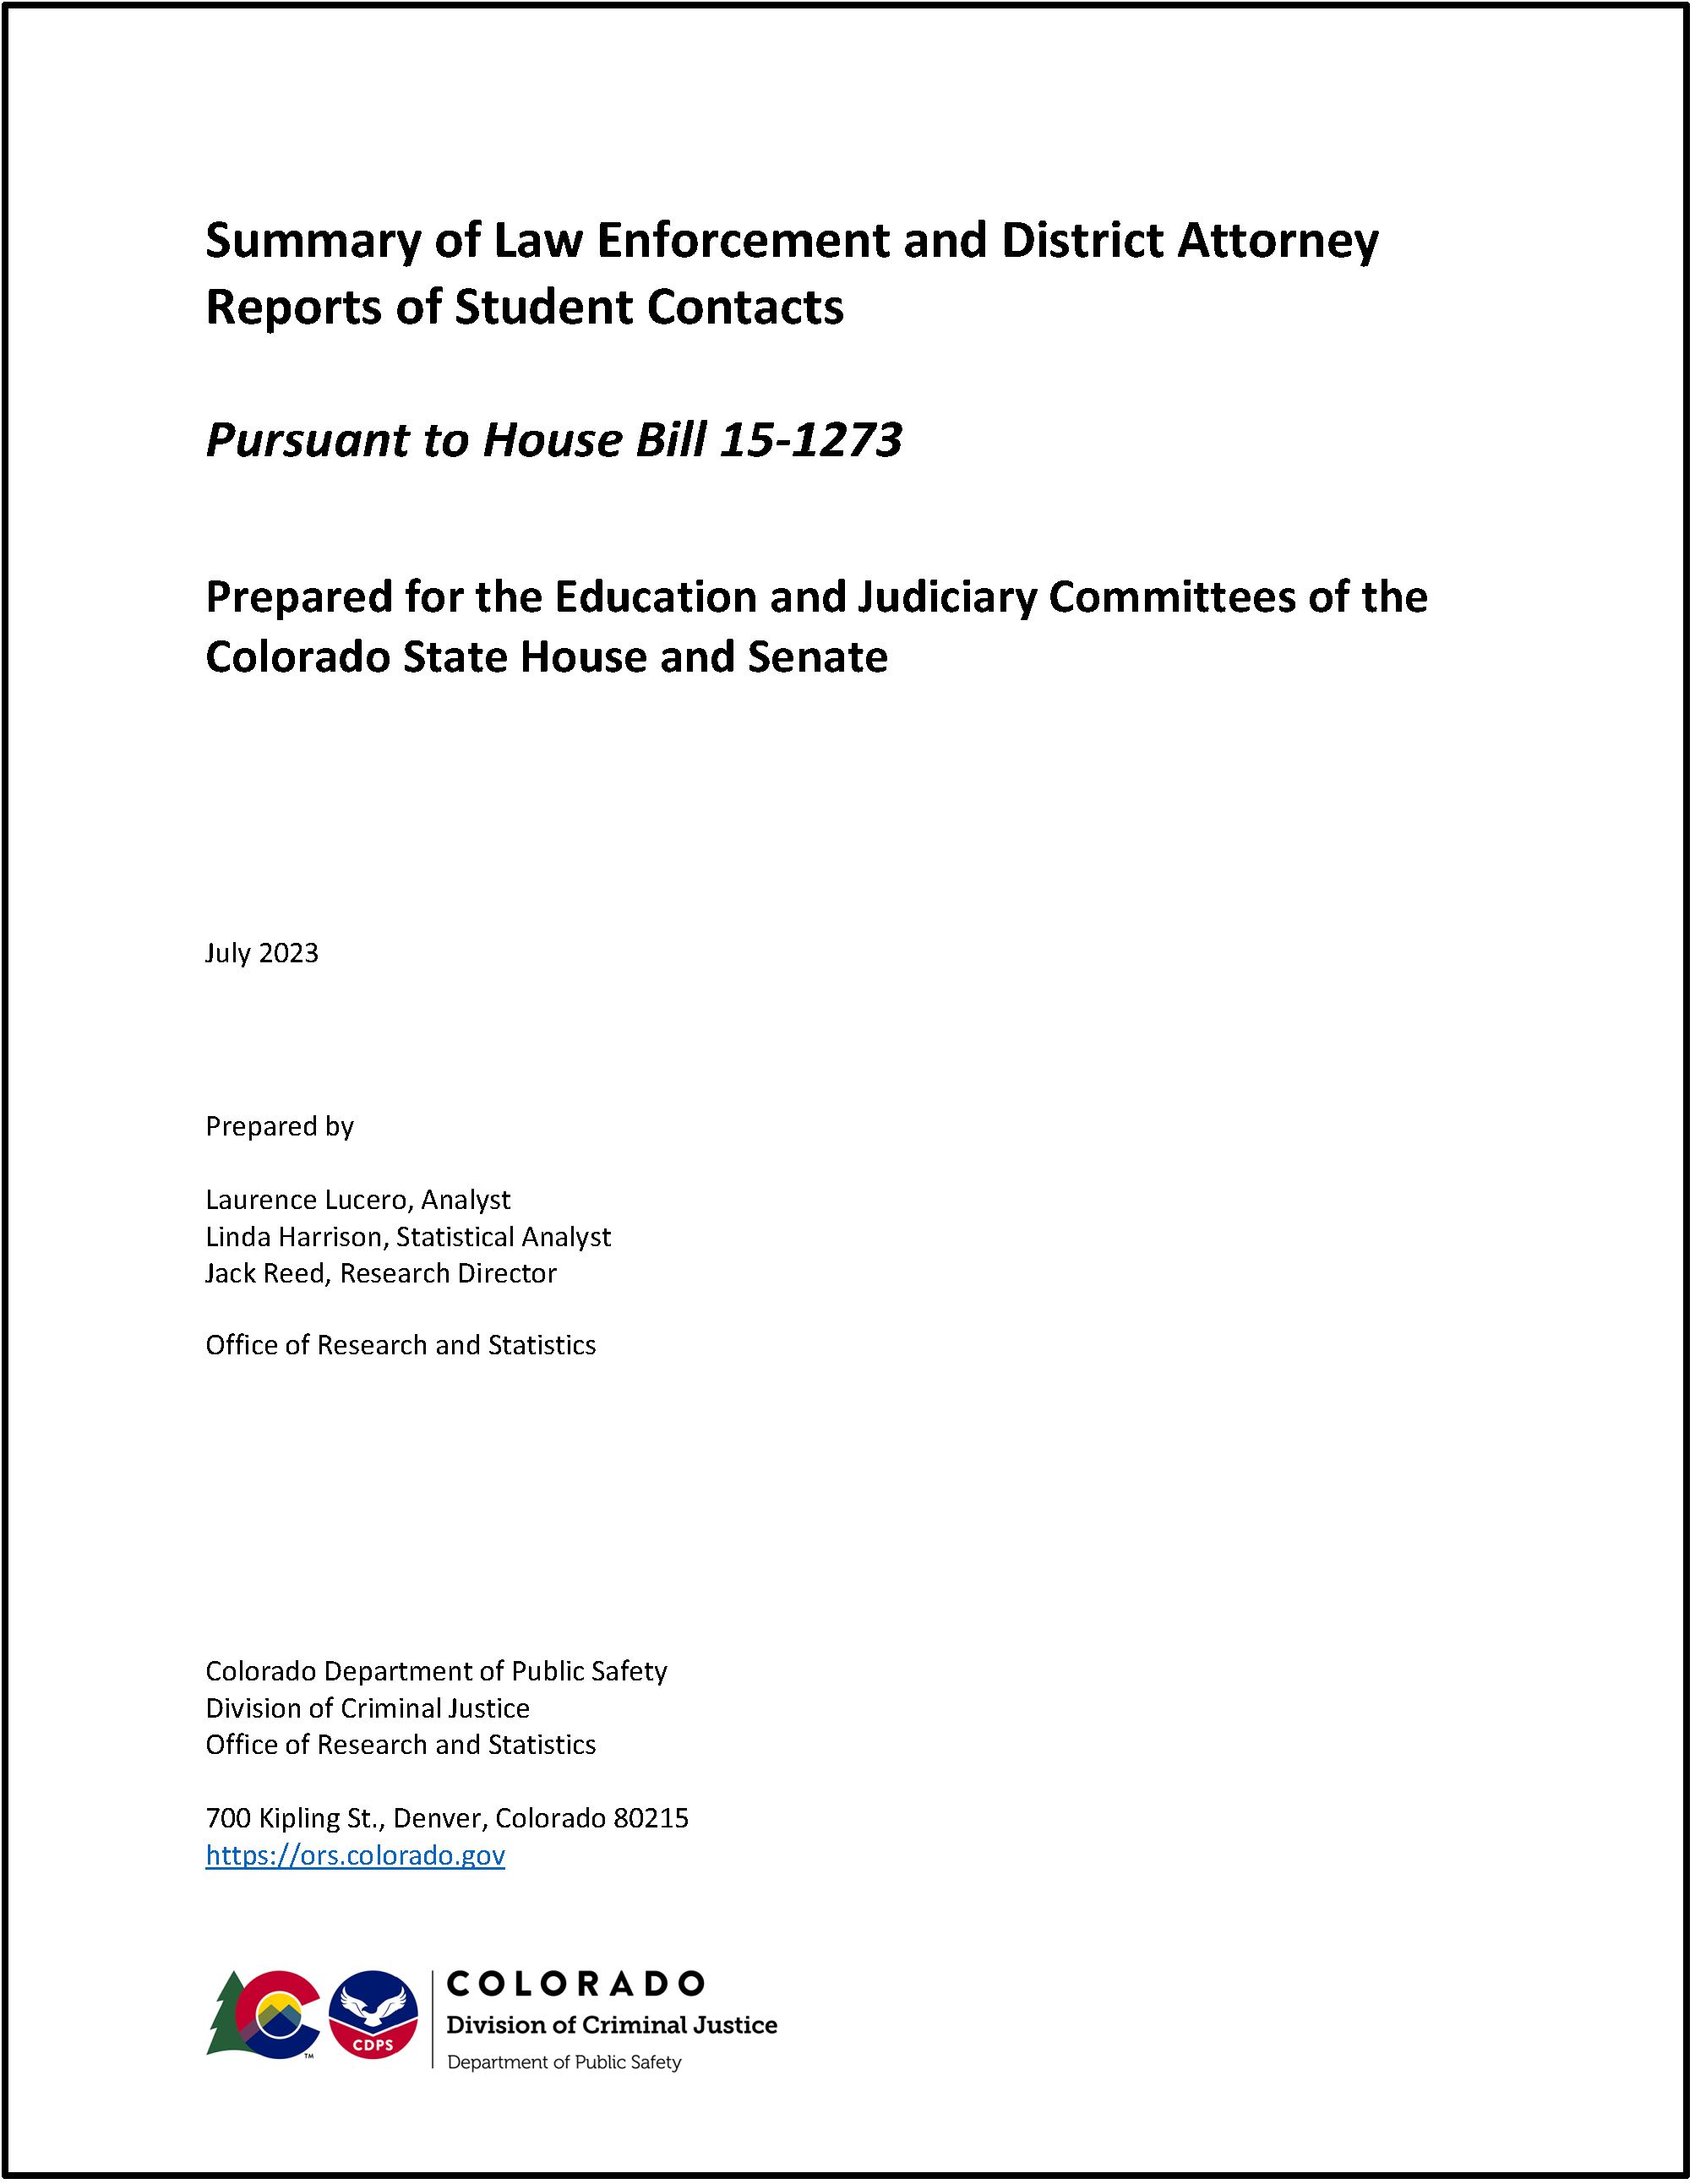 Summary of Law Enforcement and District Attorney Reports of Student Contacts: Academic Years 2021-2022 (July 2023)